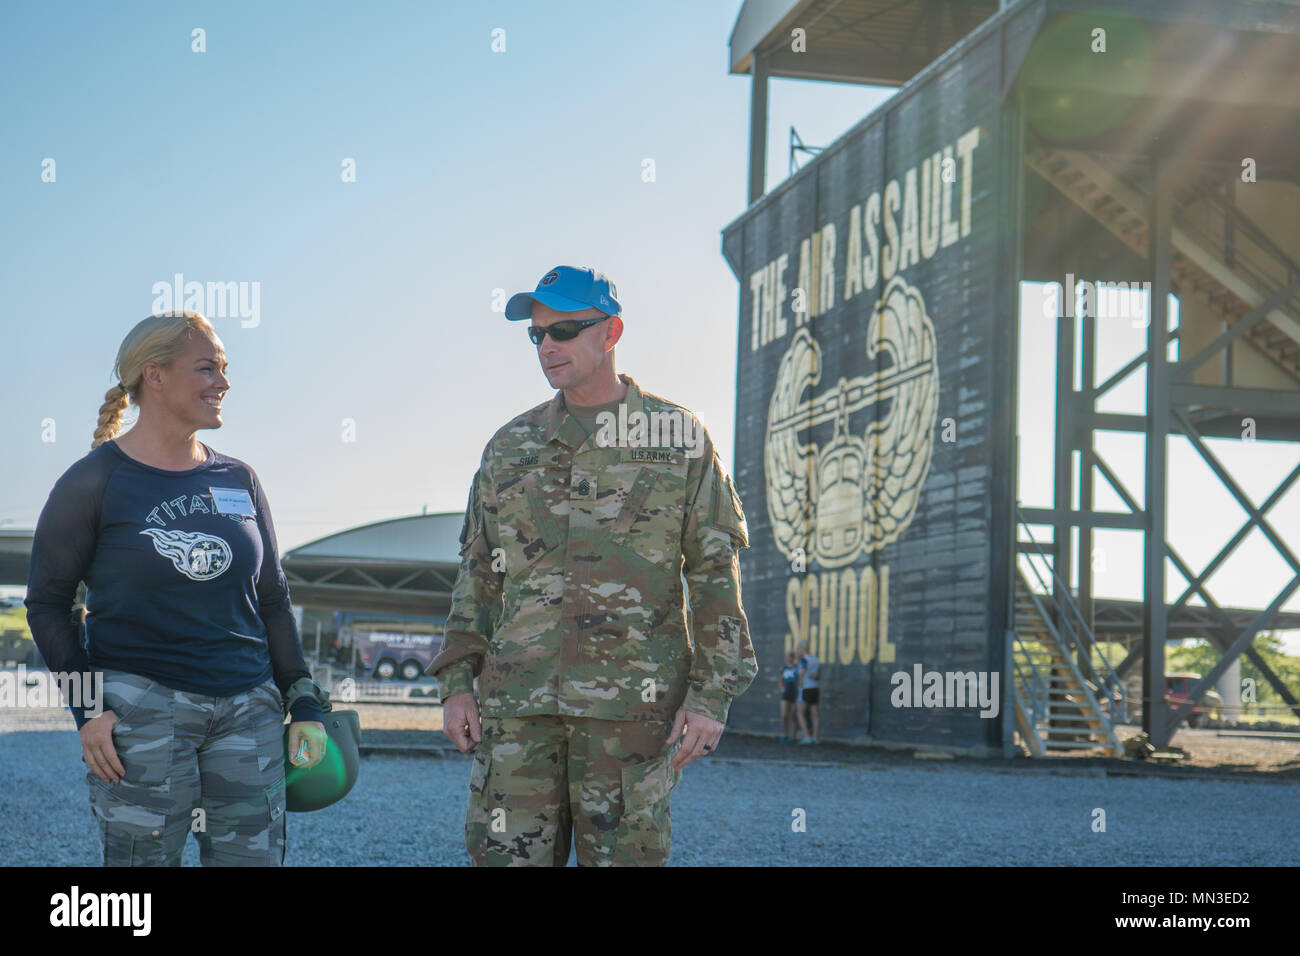 Heidi Watterson, wife of Tennessee Titans strentgh and conditioning coach, speaks with Command Sgt. Maj. Todd Sims, senior enlisted advisor, 101st Airborne Division about the days events on Fort Campbell on Aug 24. Women of the Tennessee Titans football team had the opportunity to be a Soldier for a day. (US Army photo by Spc. Patrick Kirby) Stock Photo